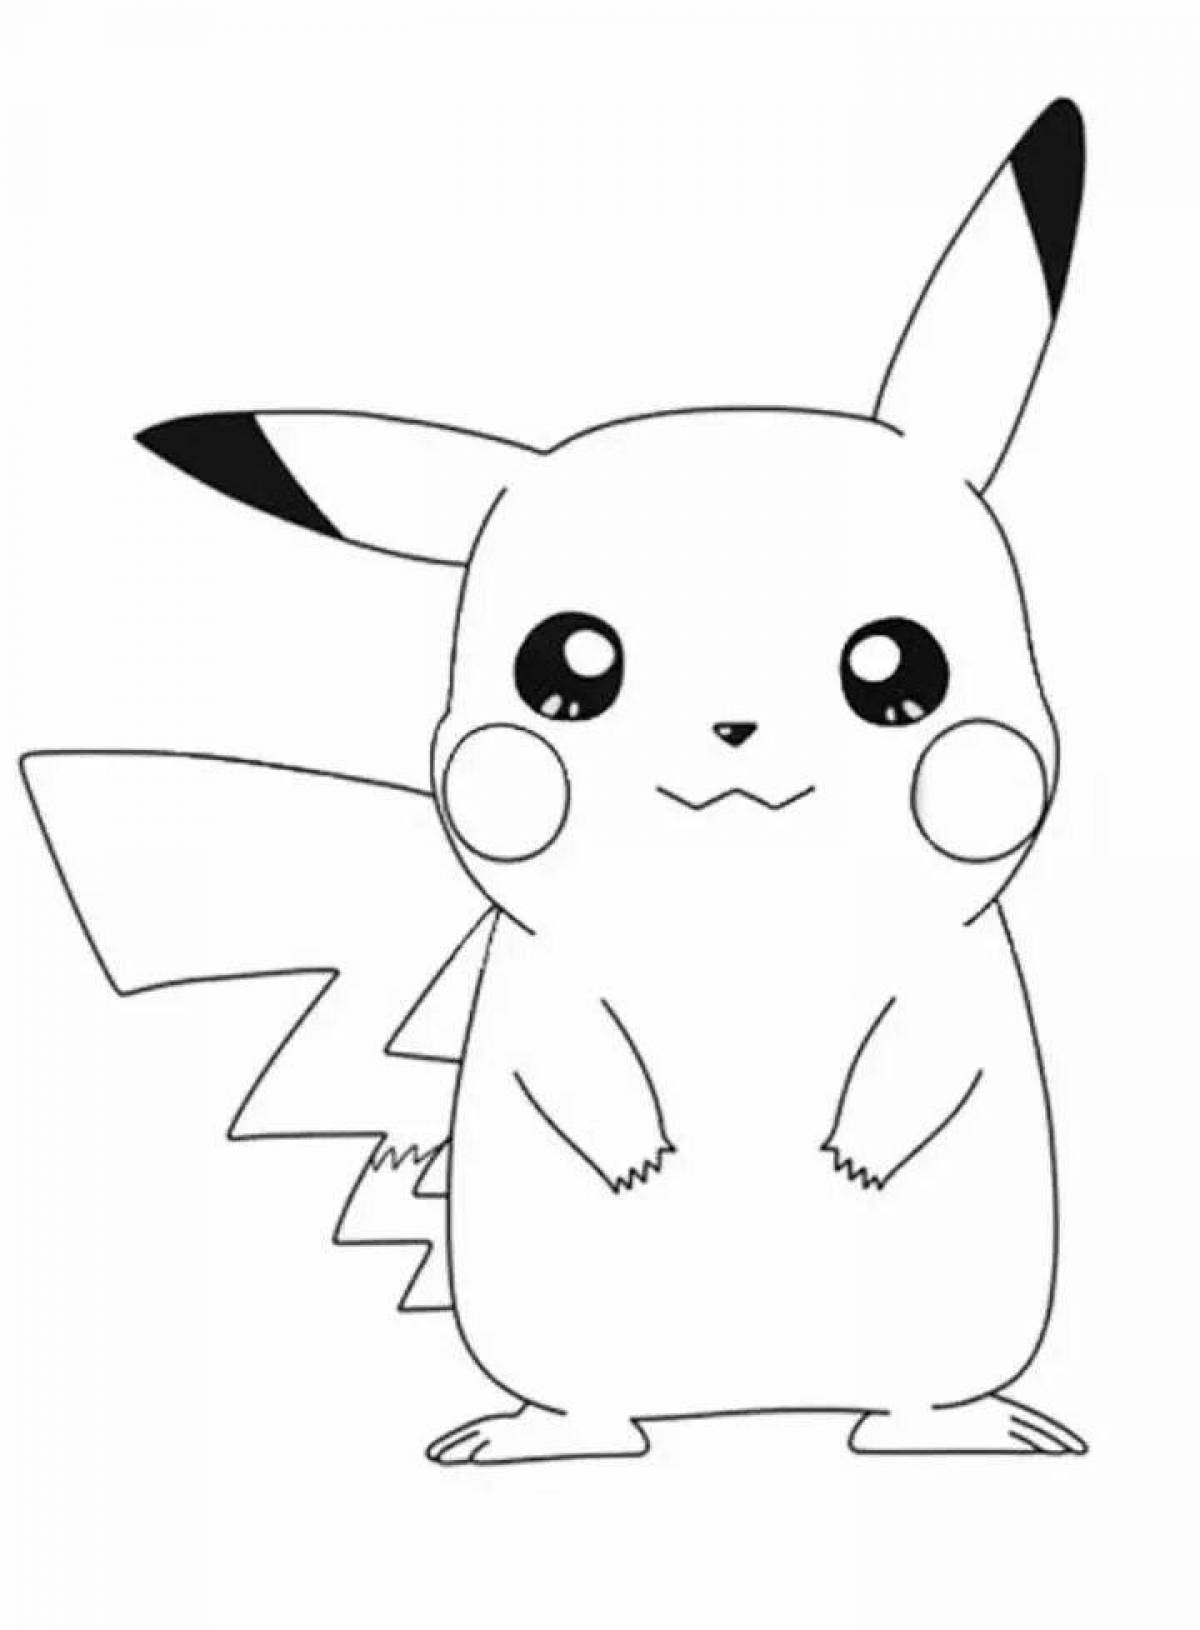 Witty anime pikachu coloring book